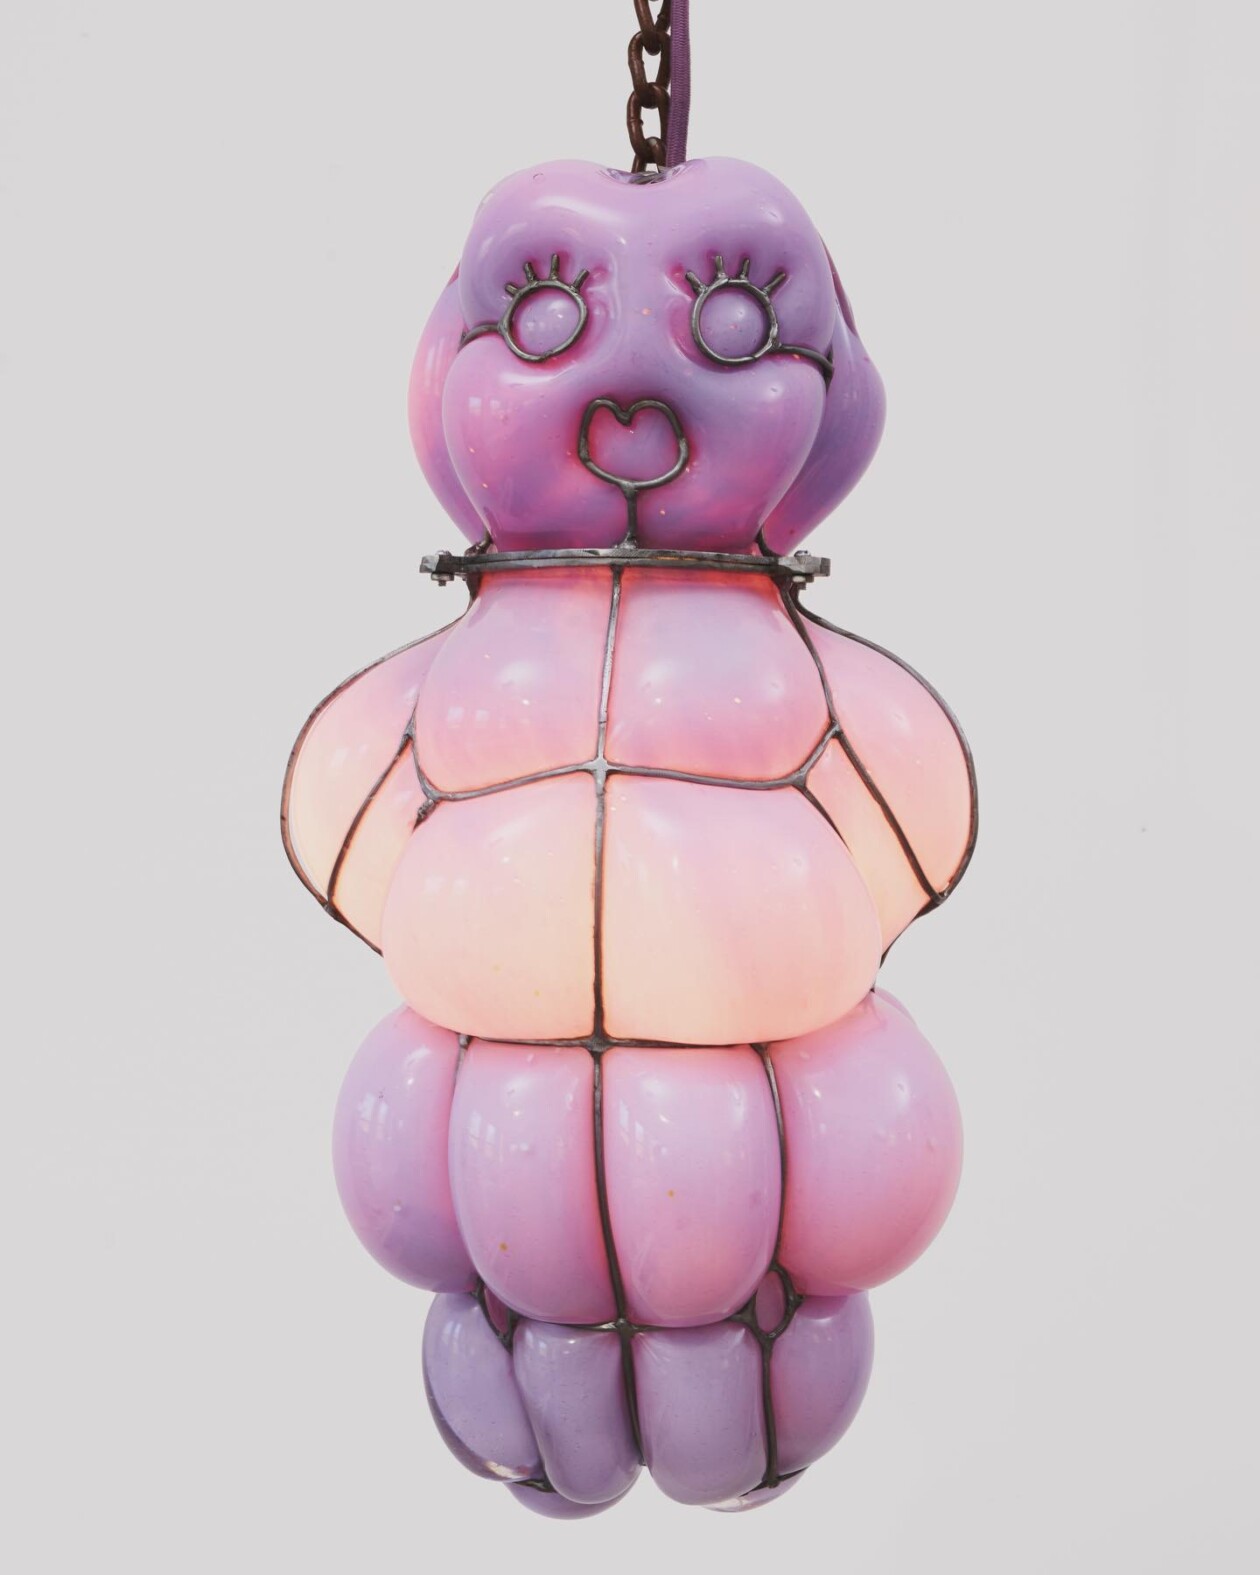 Sculptural Glass Pendants Of Otherworldly Blob Creatures By Katie Stout (8)